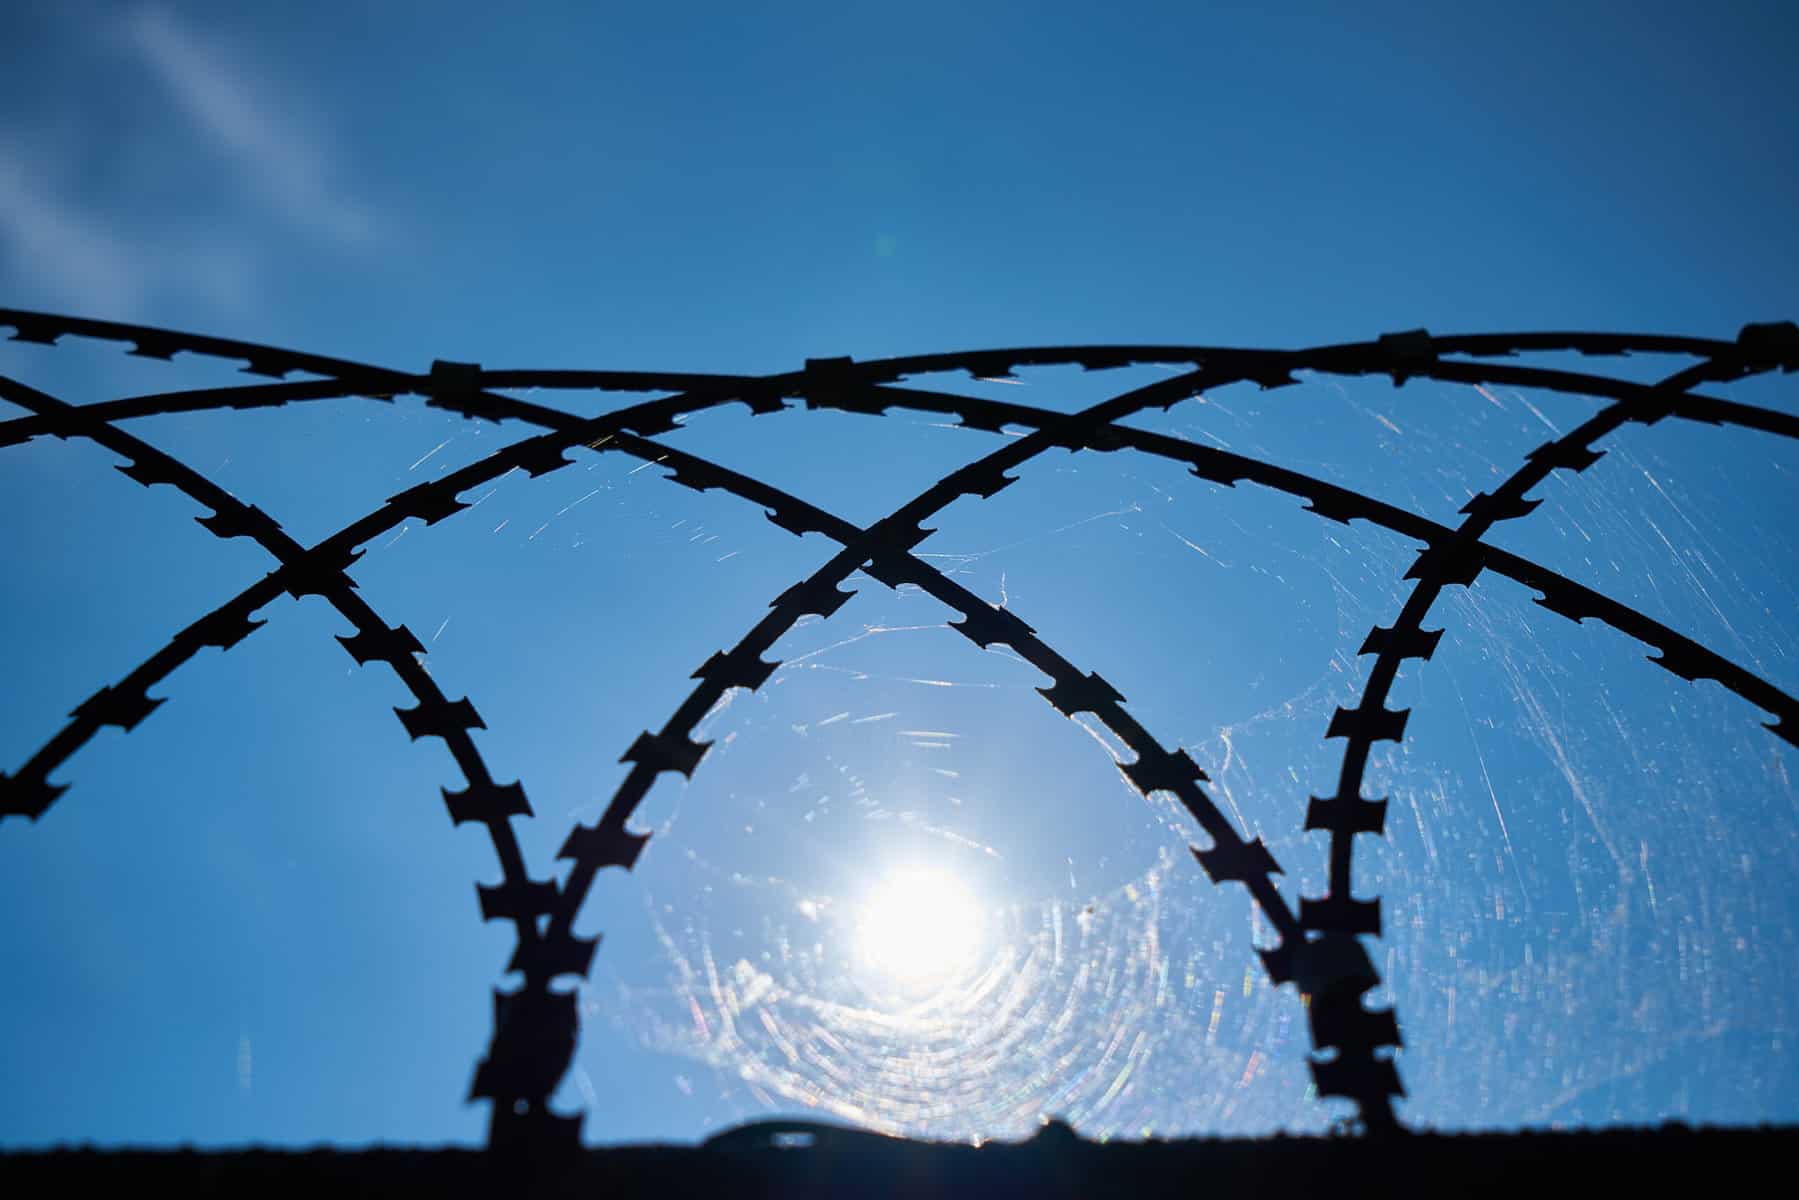 Metal arches, perhaps barbed wire, in silhouette against a blue sky.